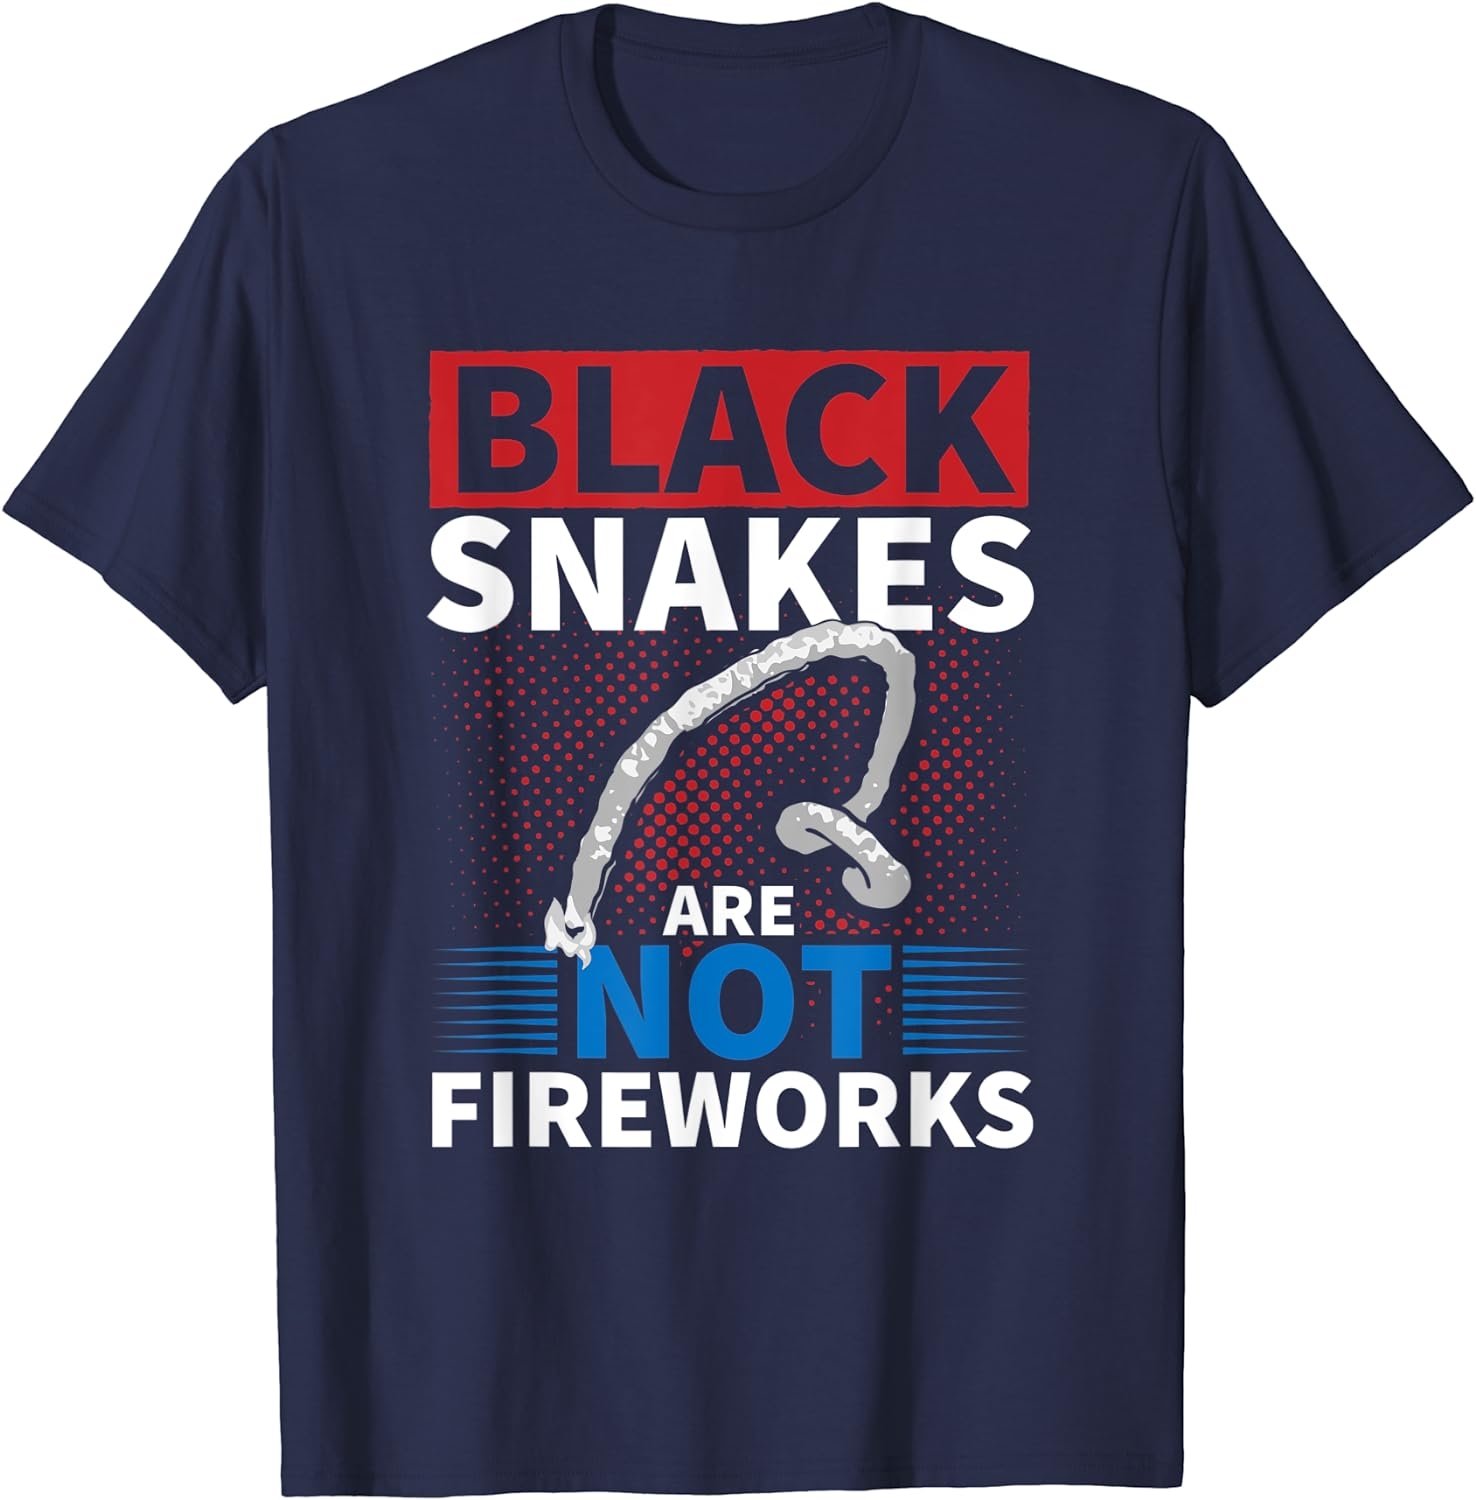 July 4th Independence Day Black Snakes not Fireworks T-Shirt   price checker   price checker Description Gallery Reviews